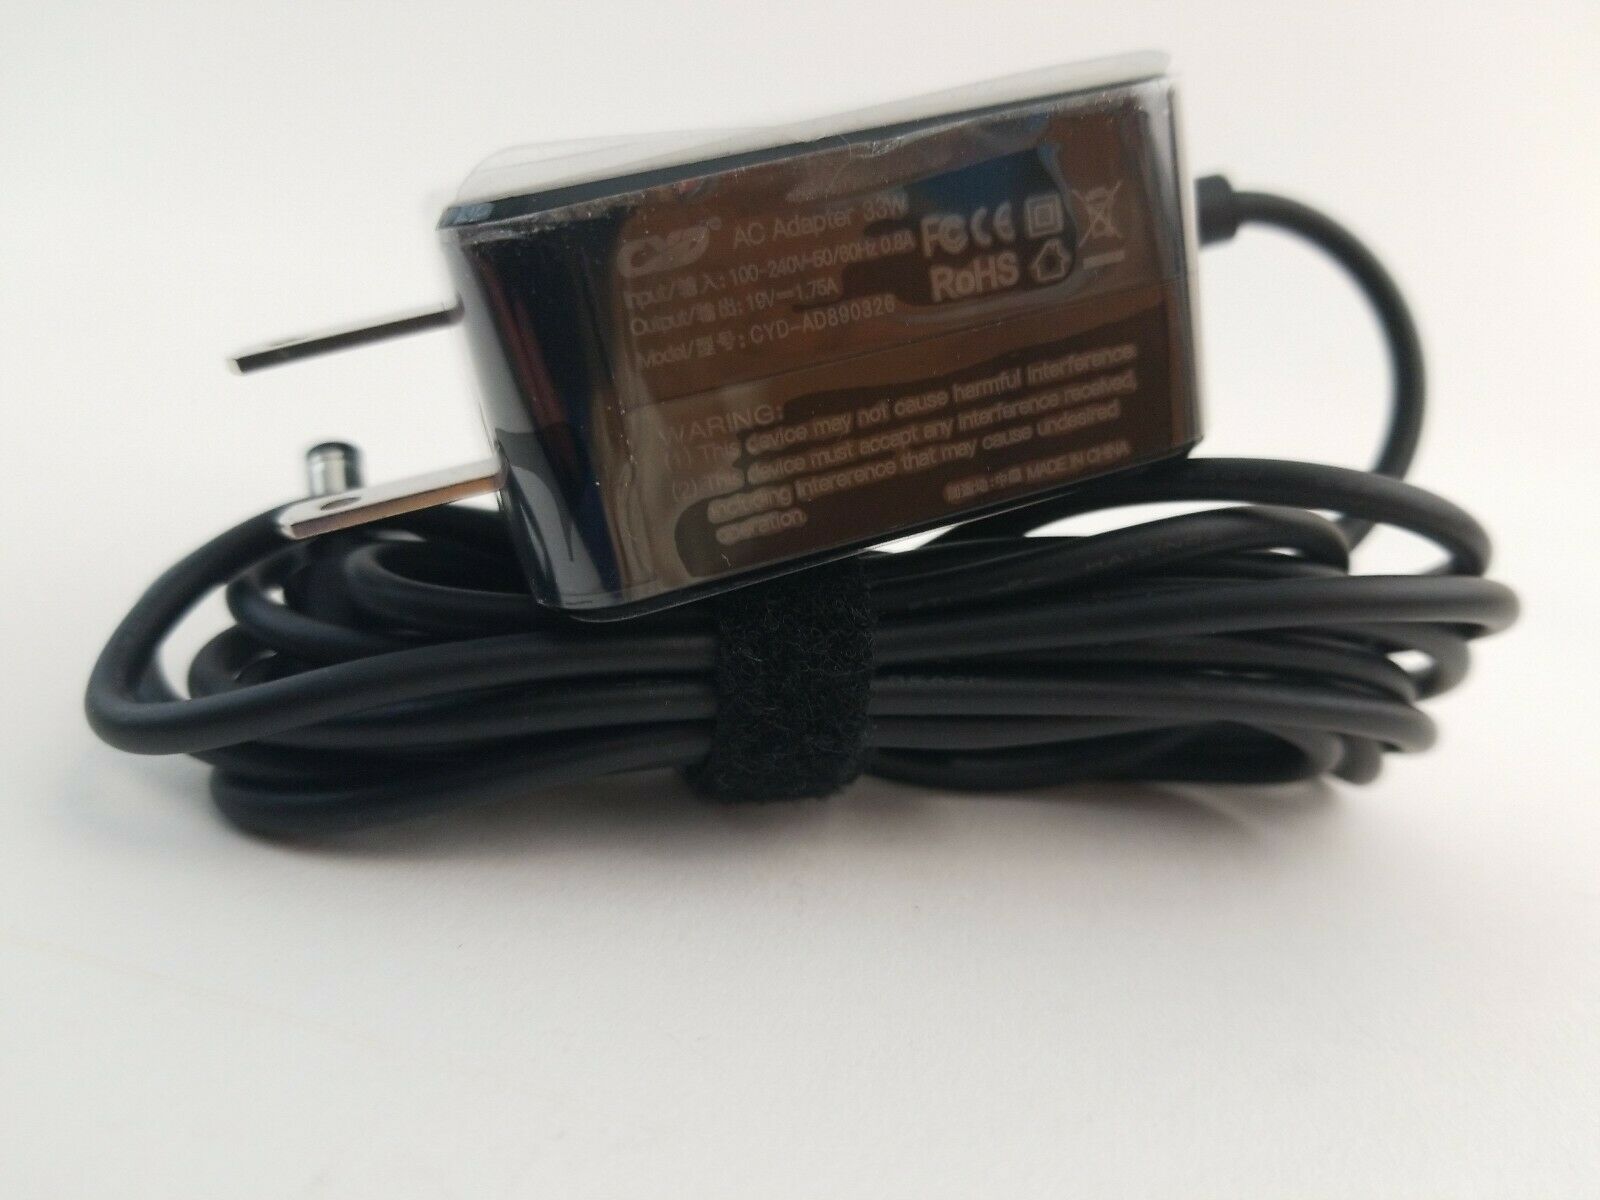 CYD-AD890326 AC Adapter 33W Charger Power Supply CYD In 100-240V-50/60Hz 0.8A Brand: CYD Output Current: 1.75A Type: